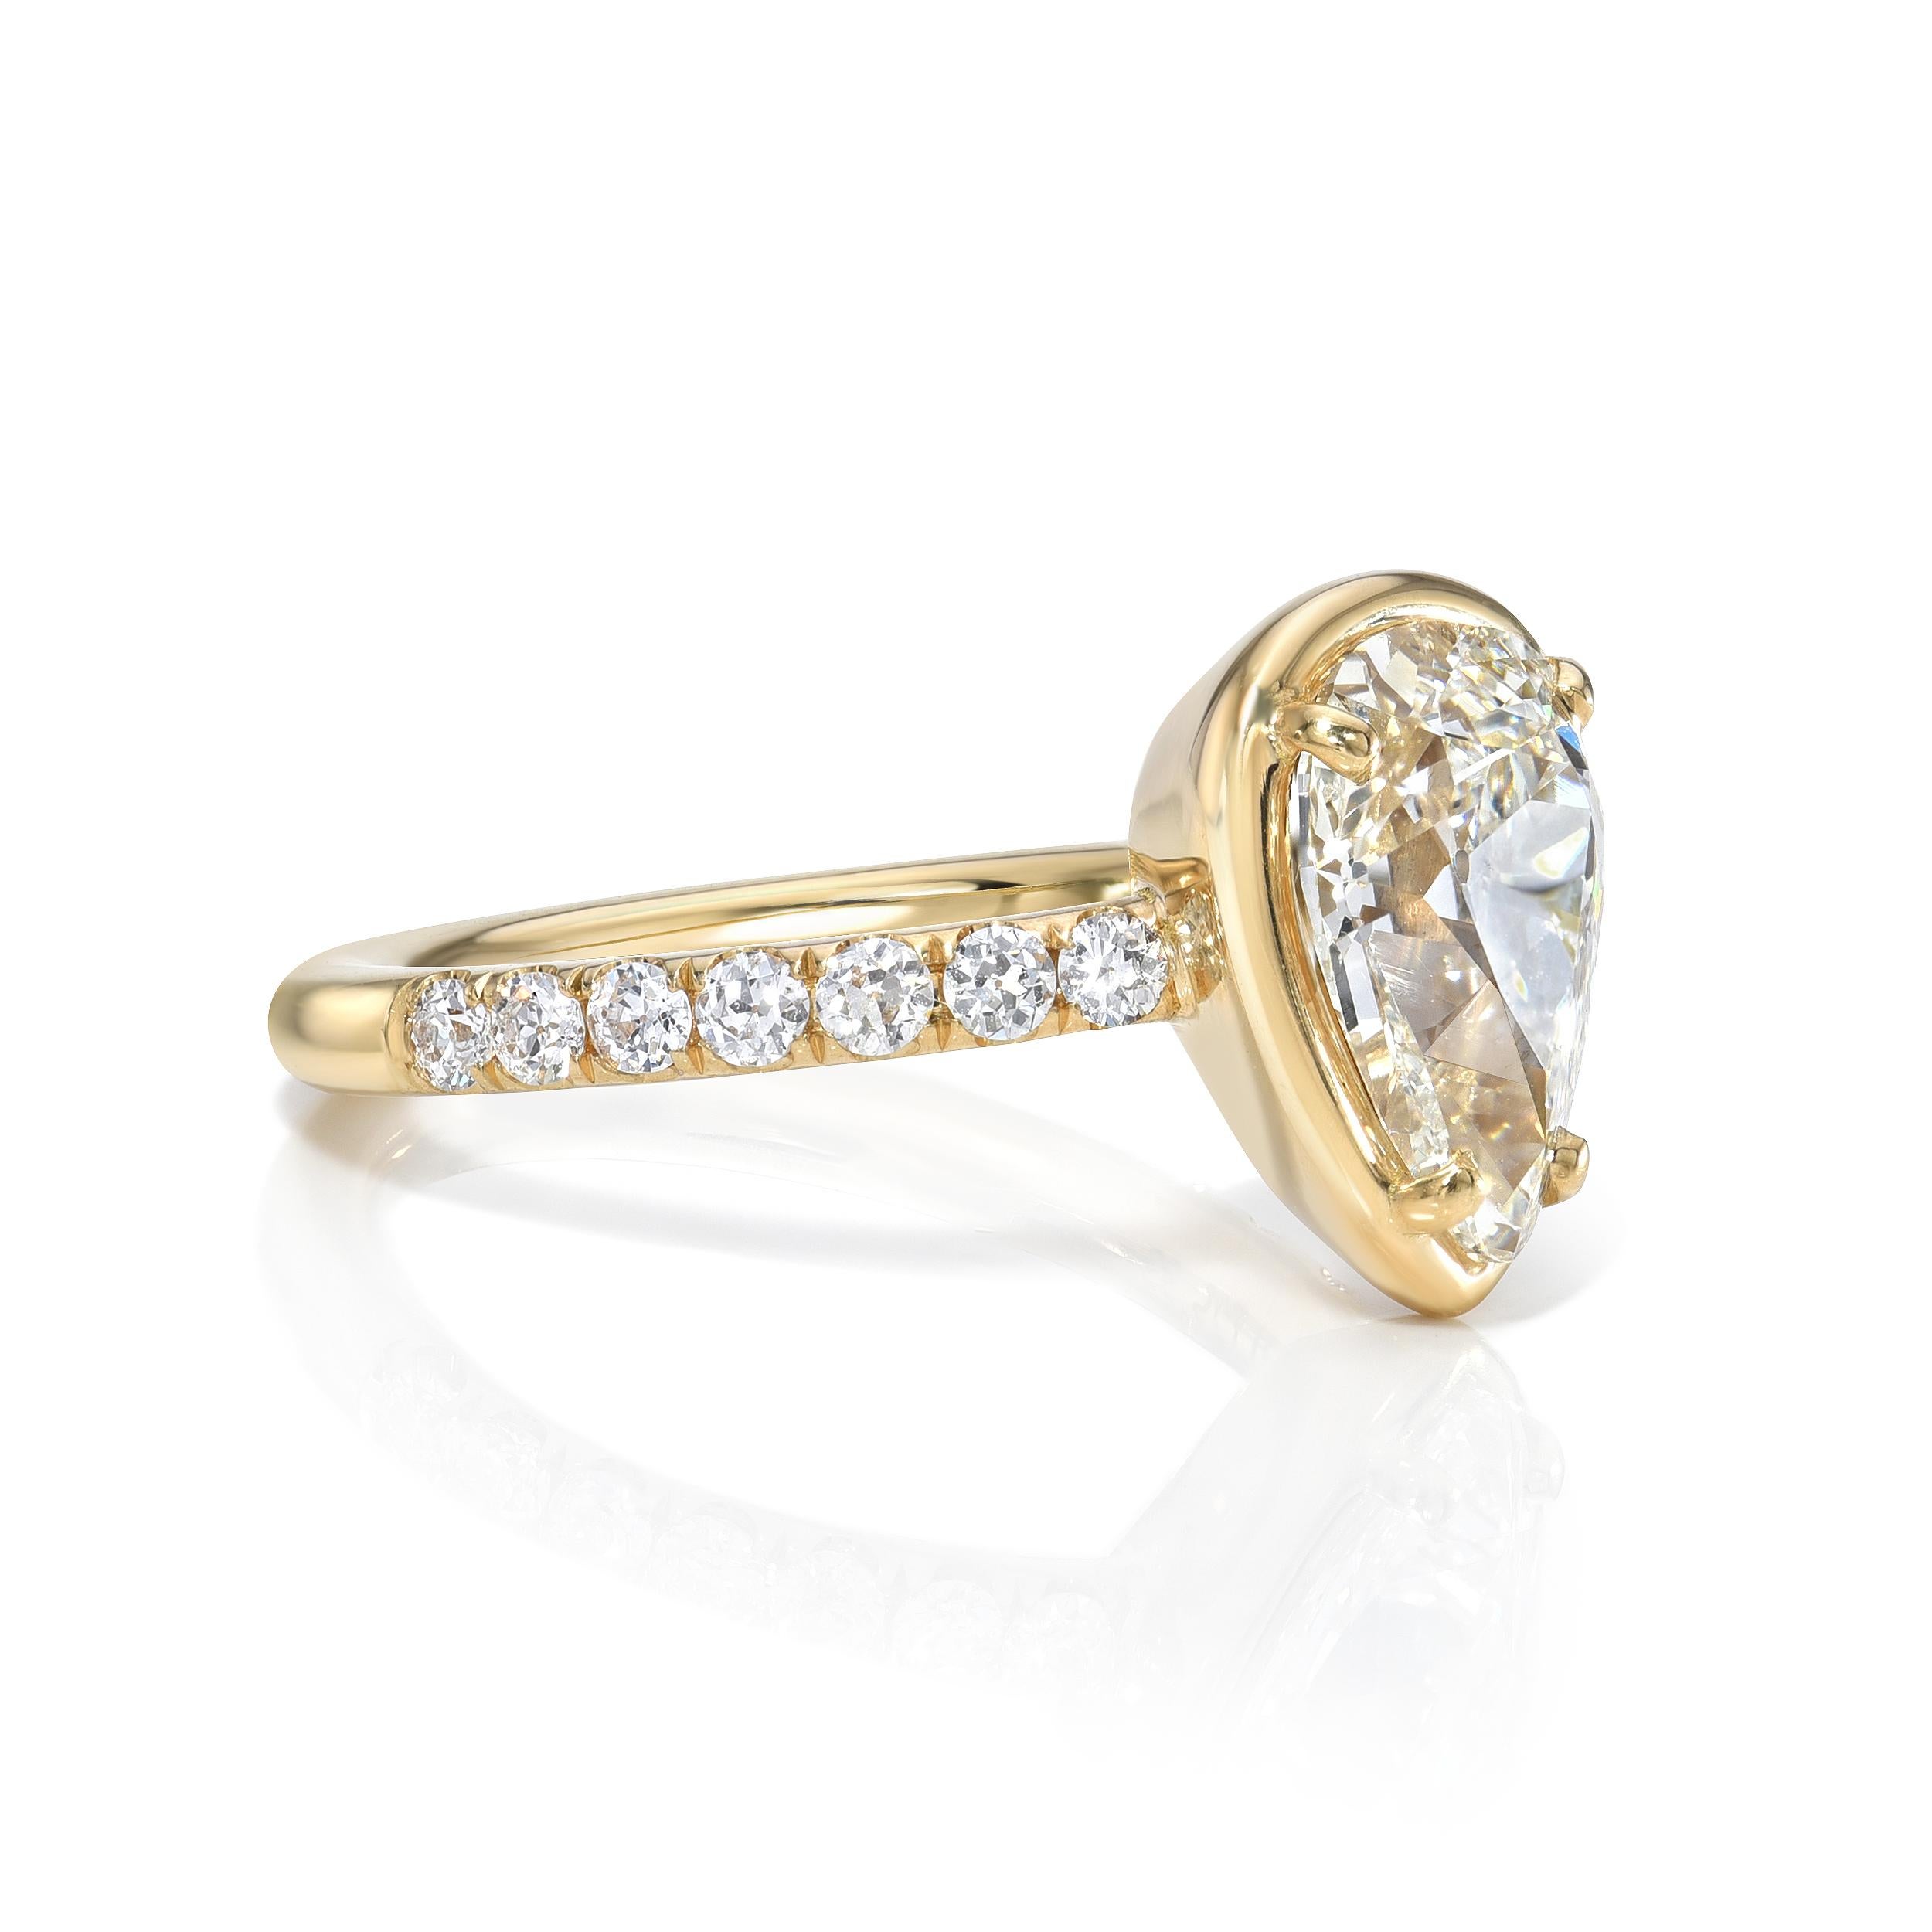 2.13ct H/SI1 GIA certified pear shaped diamond with 0.36ctw old European cut accent diamonds prong set in a handcrafted 18K yellow gold mounting.